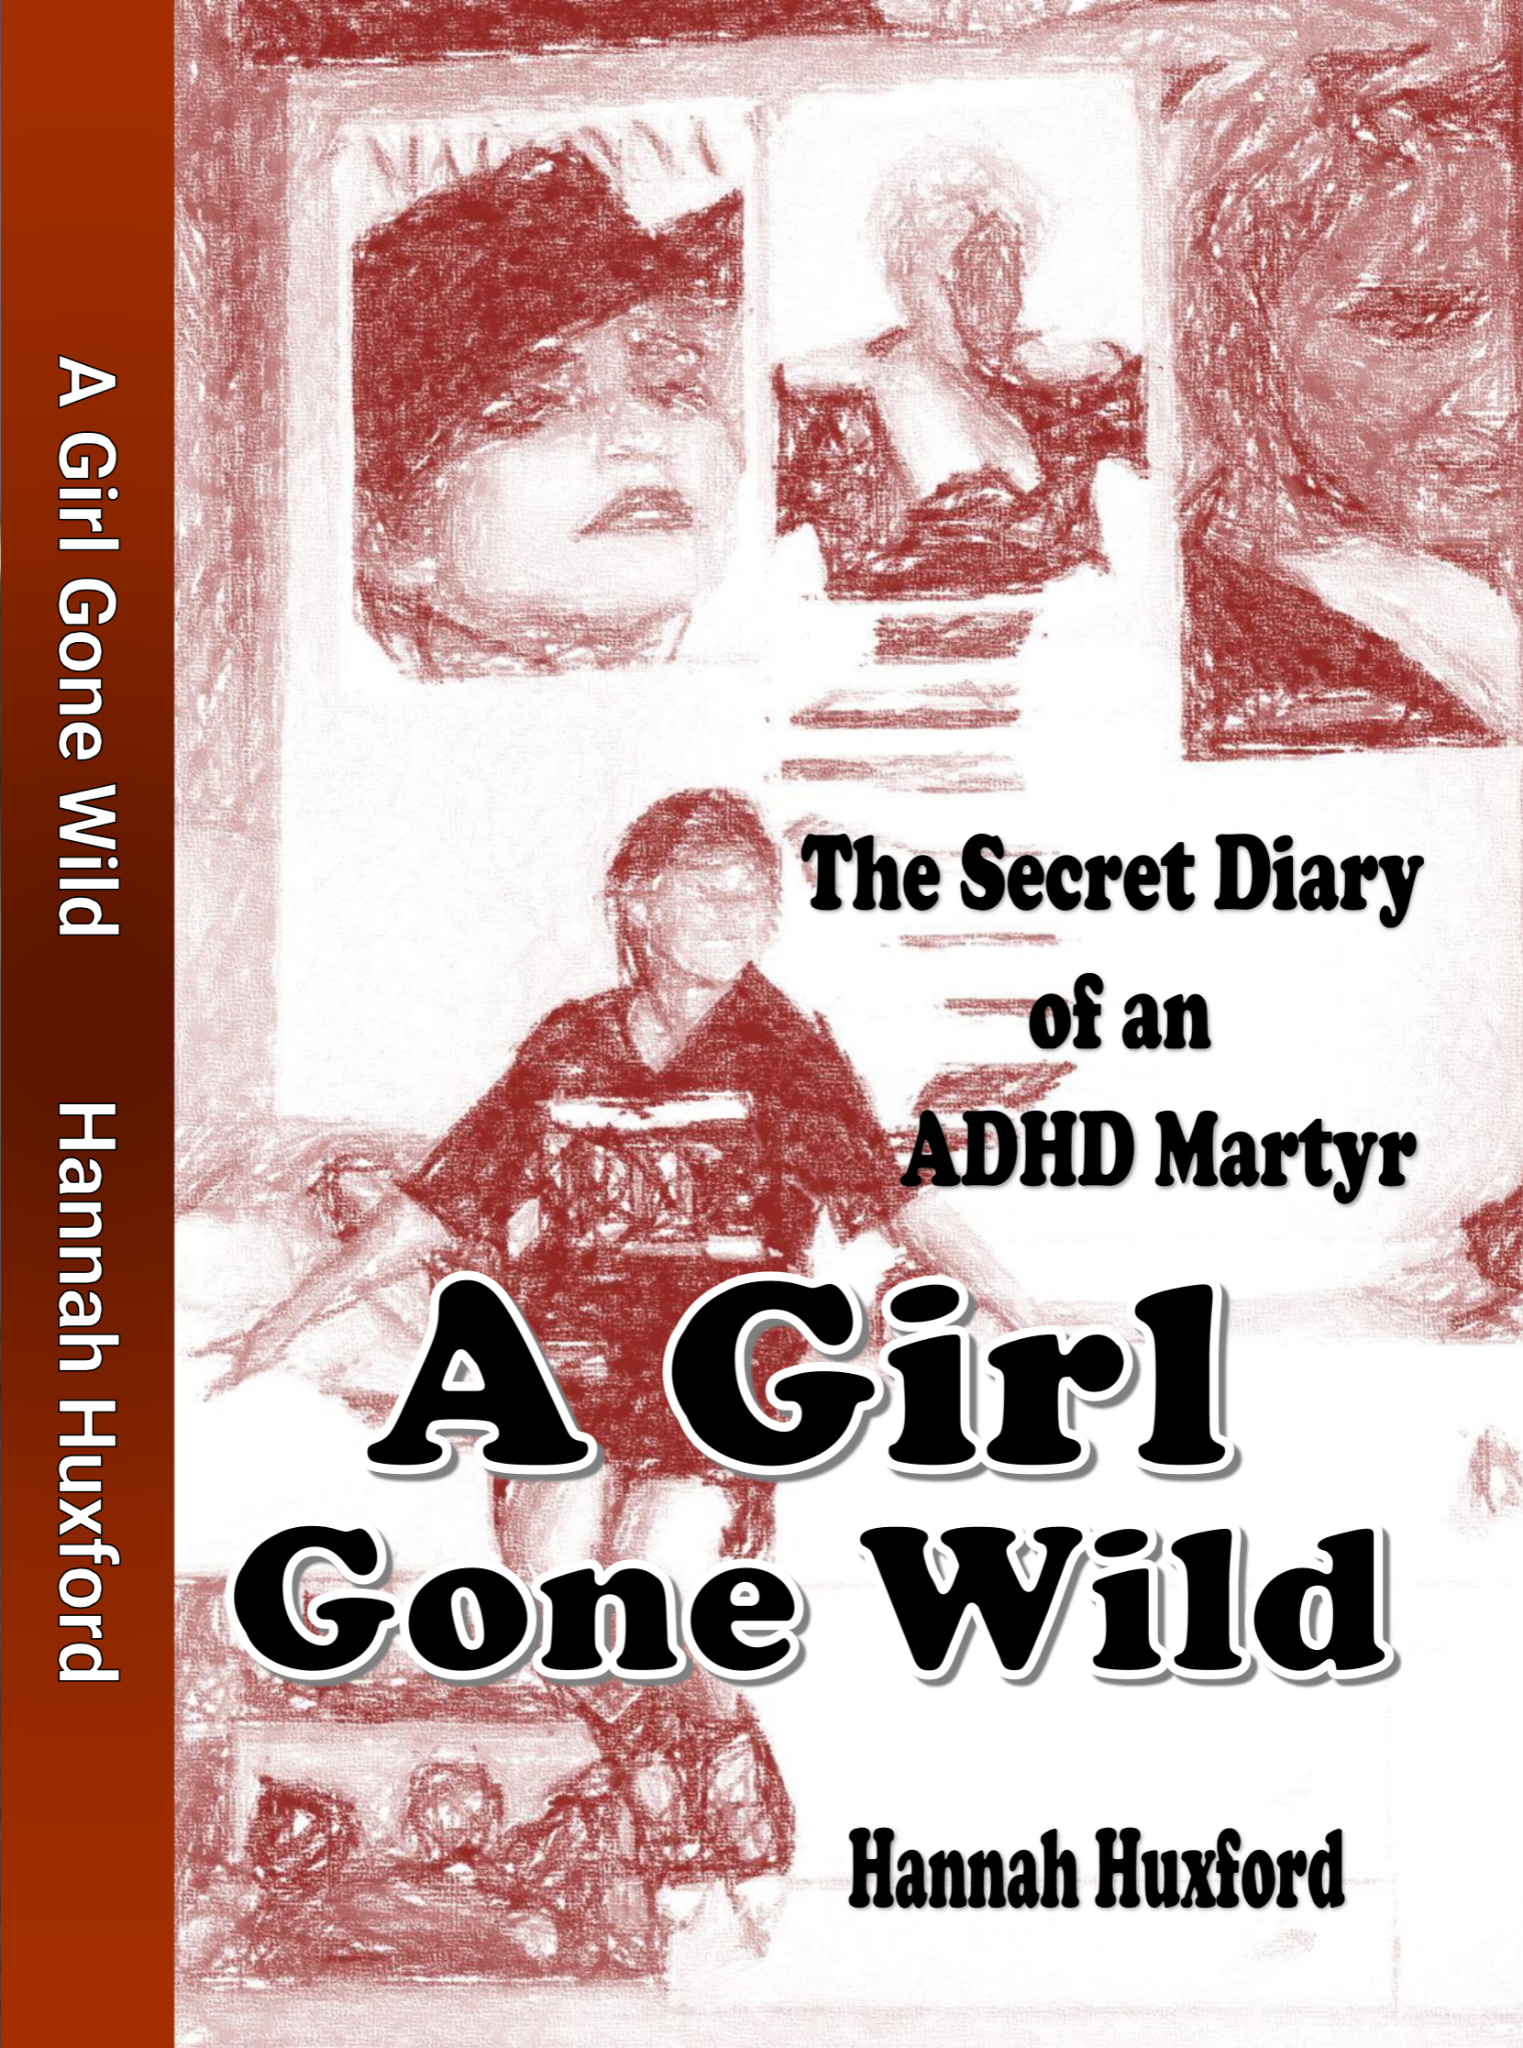 The Secret Diary of an ADHD Martyr: A Girl Gone Wild